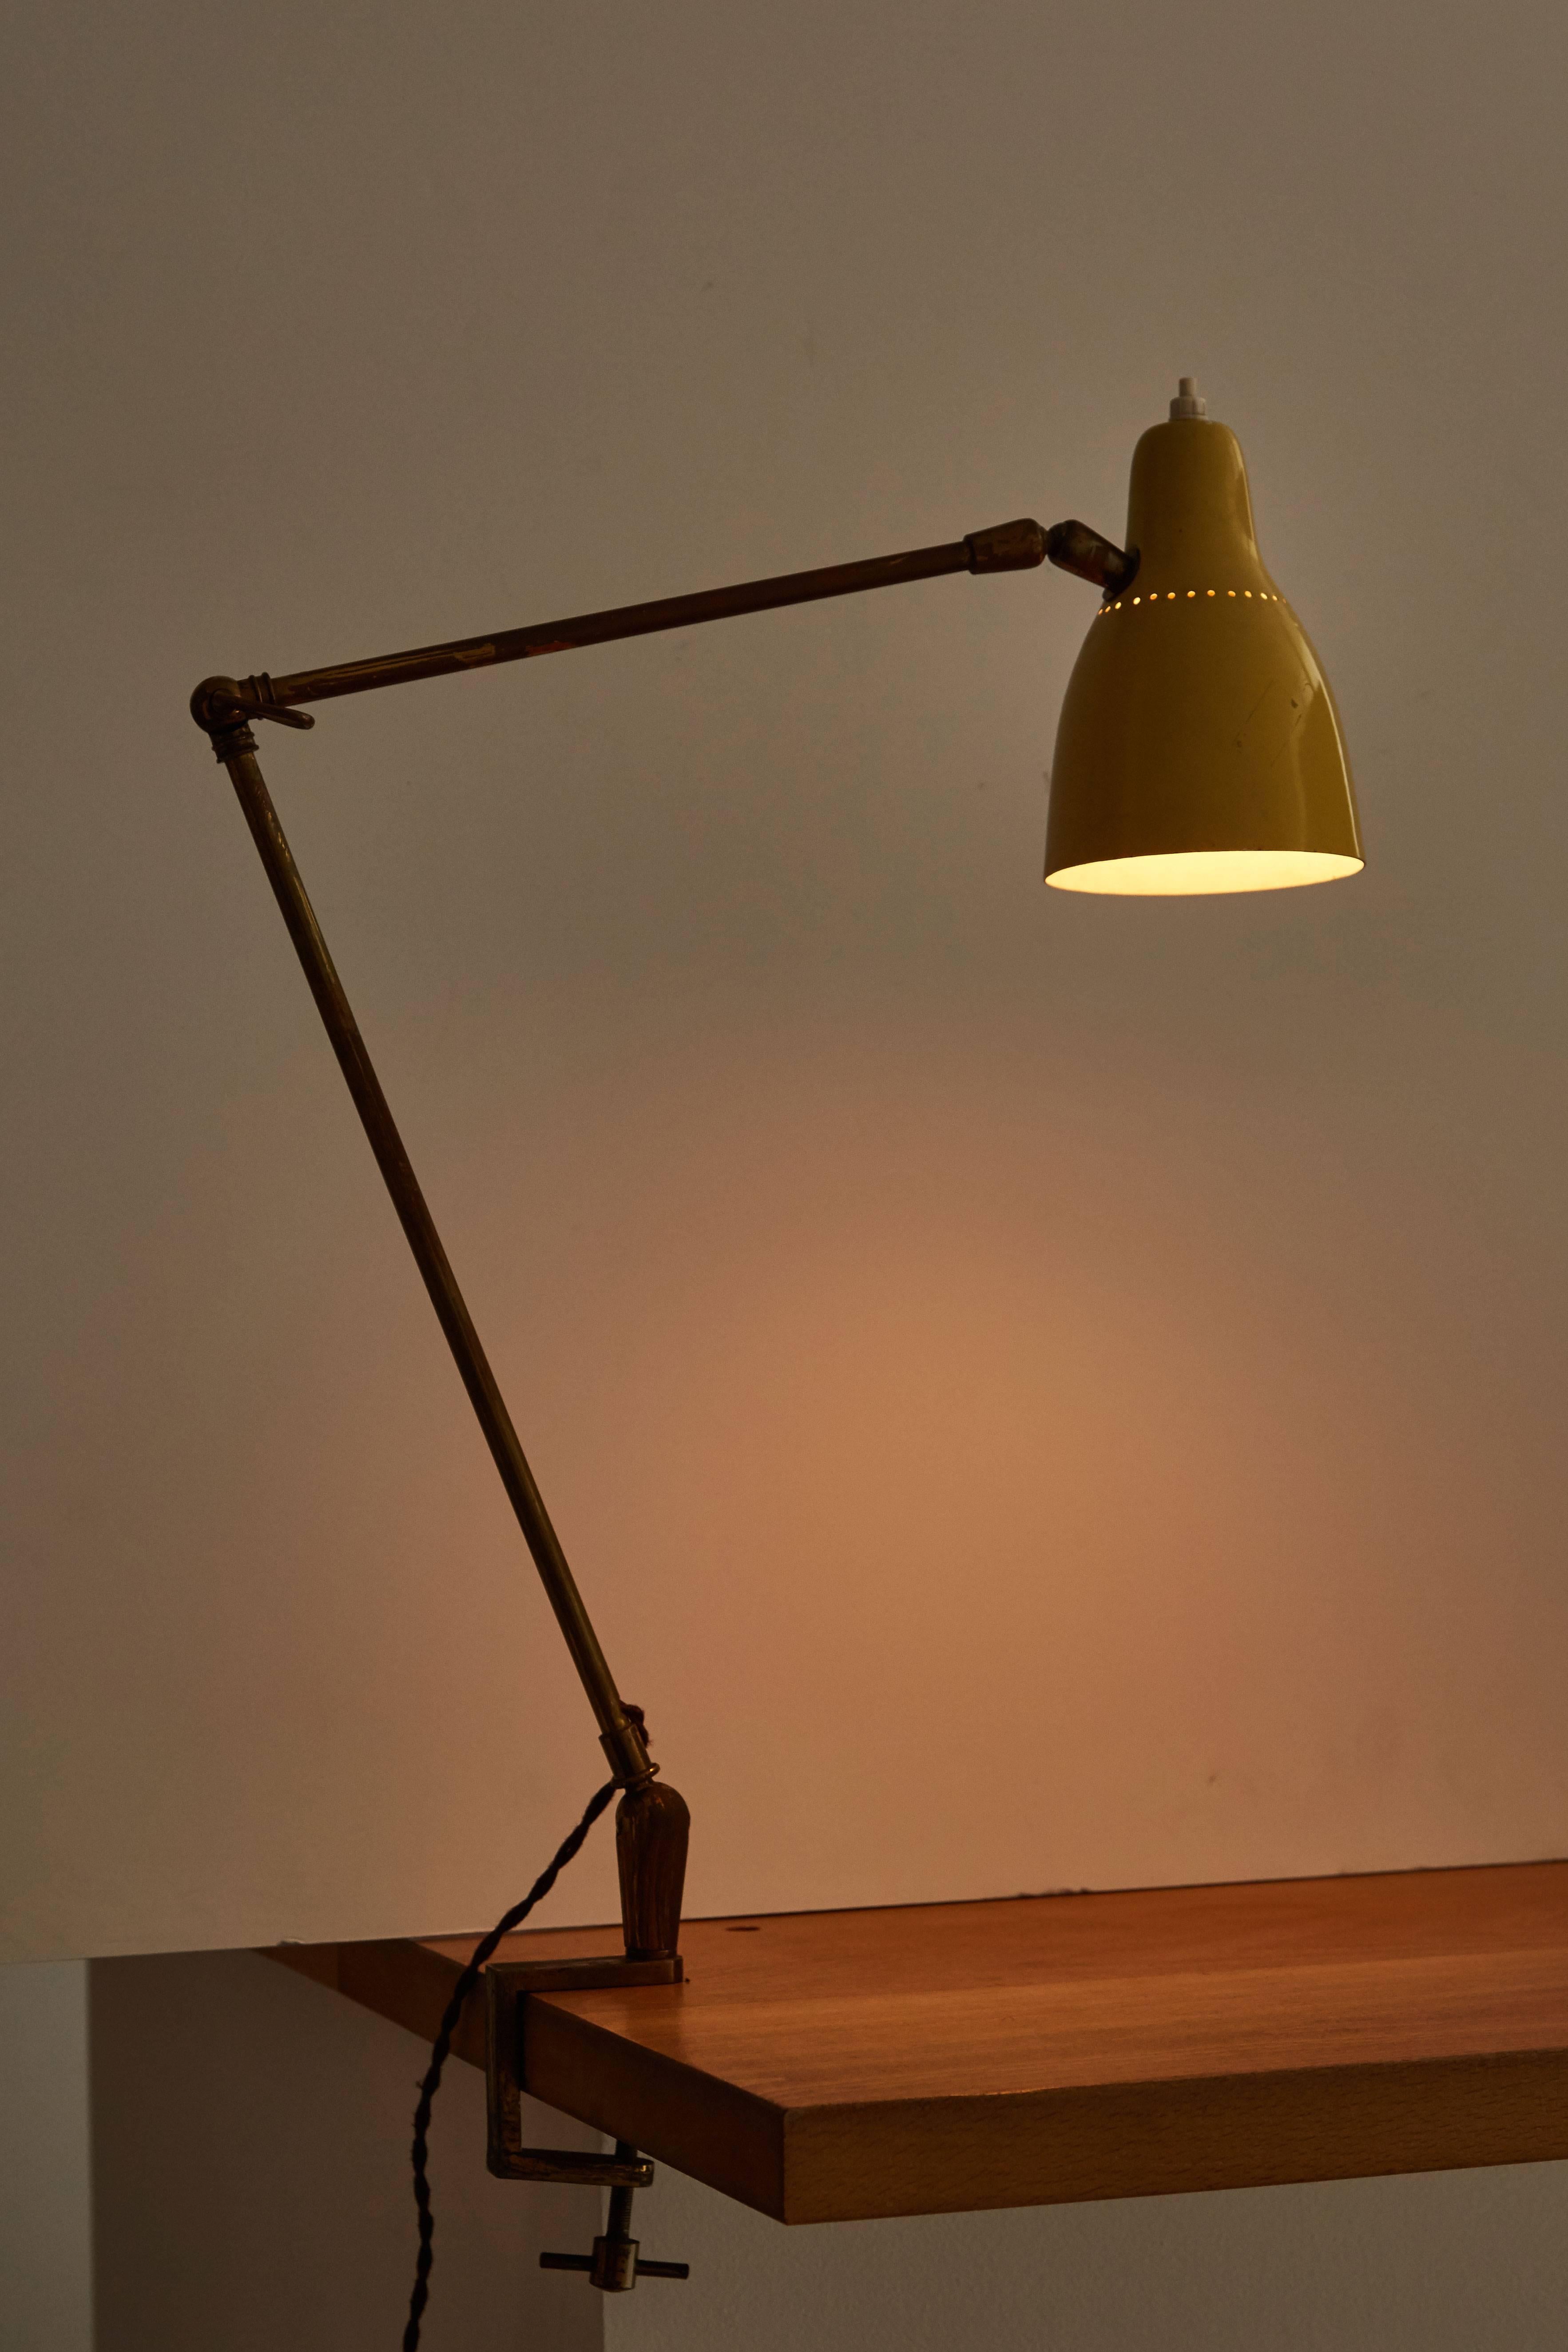 Table mounted articulating task lamp made by O-Luce in the 1950s. Perforated shade articulates up/down from the ball joint. Arm extends in height with brass key. Rewired with French twist silk cord. Takes an E27 60w maximum bulb.